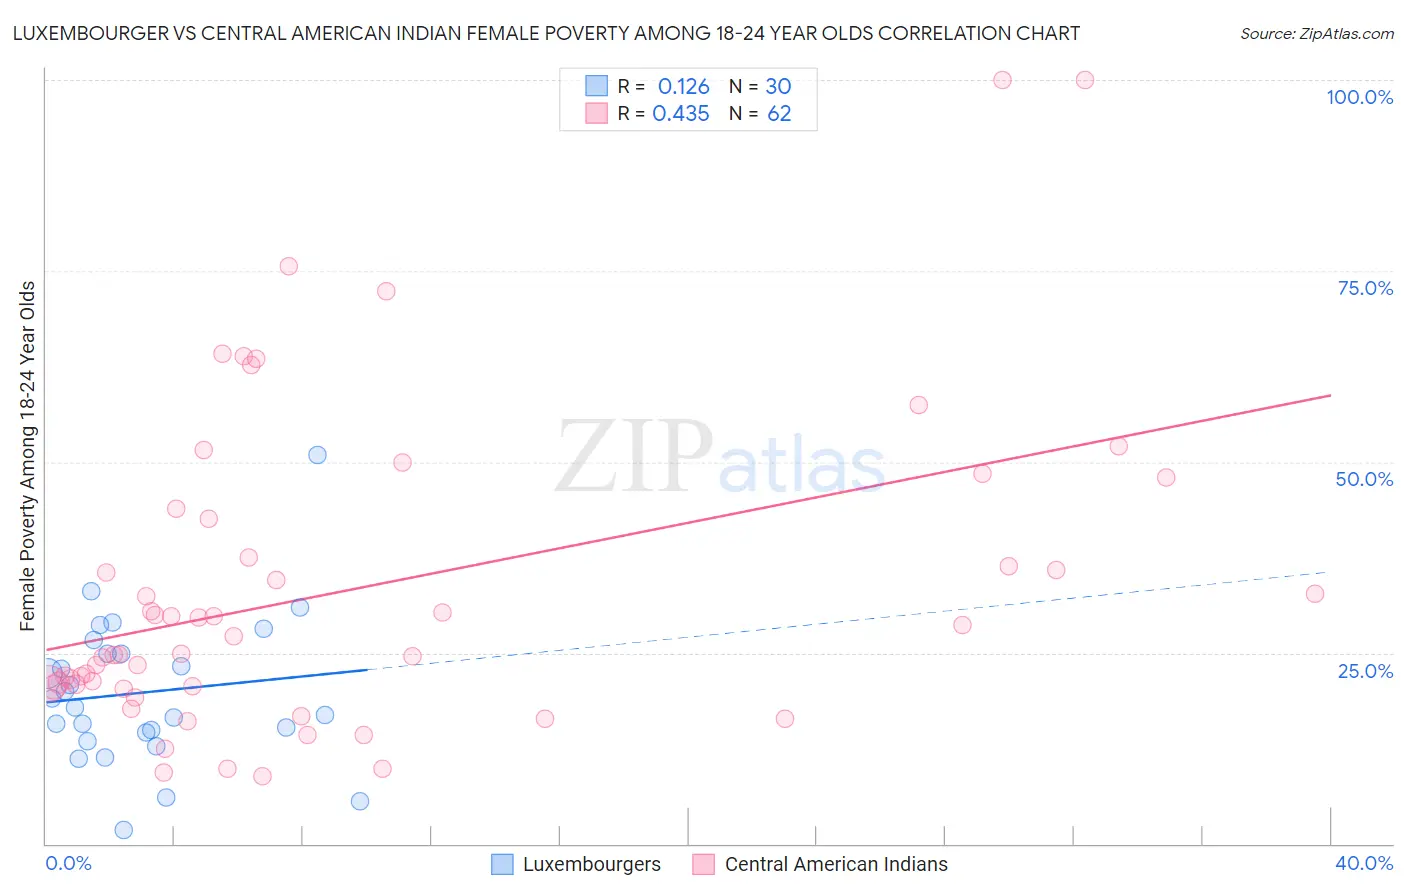 Luxembourger vs Central American Indian Female Poverty Among 18-24 Year Olds